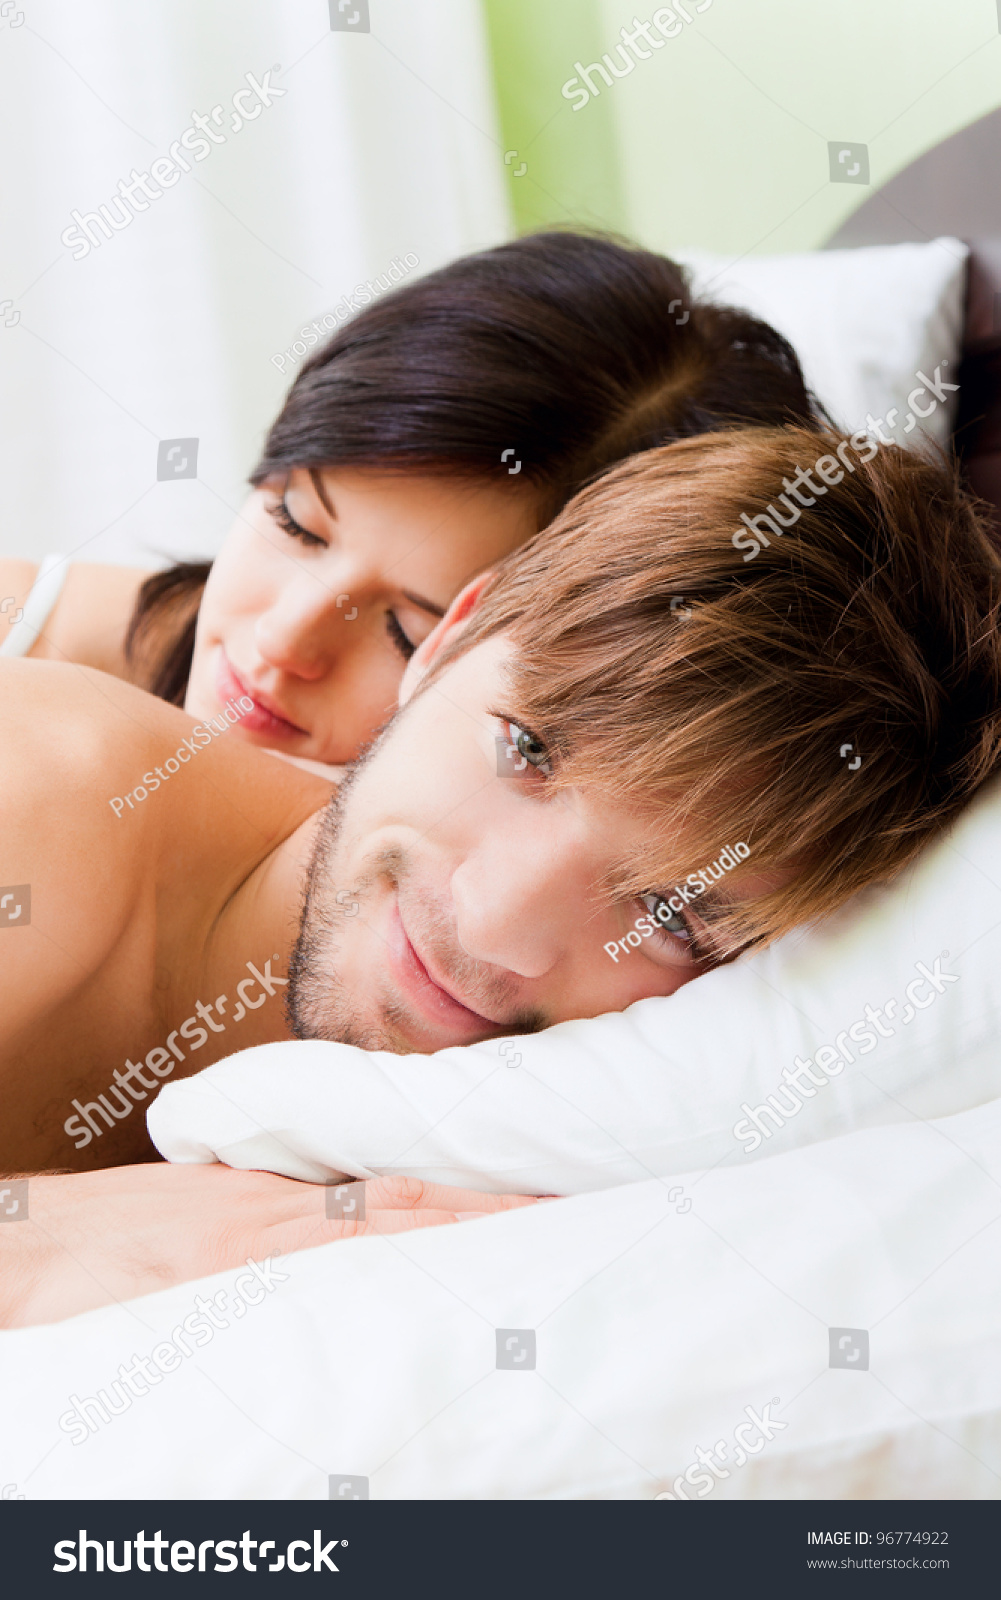 young lovely couple lying in a bed, happy smile man looking at camera, woman sleep with closed eyes #96774922